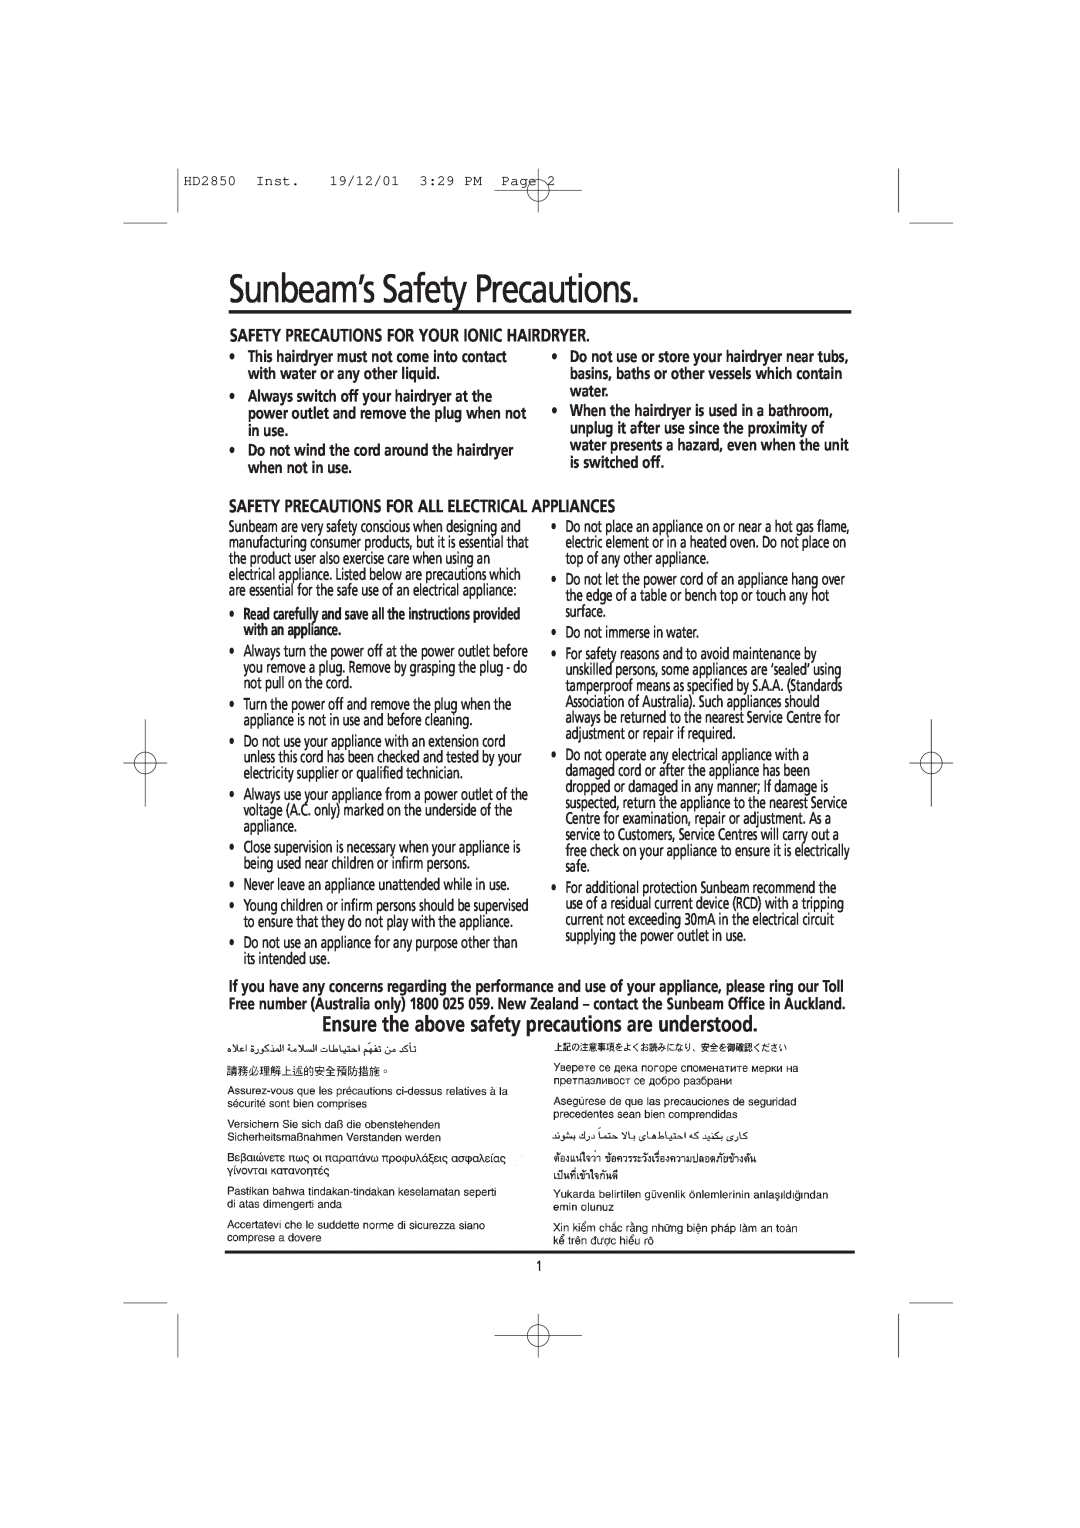 Sunbeam HD2850 manual Sunbeam’s Safety Precautions, Safety Precautions For Your Ionic Hairdryer 